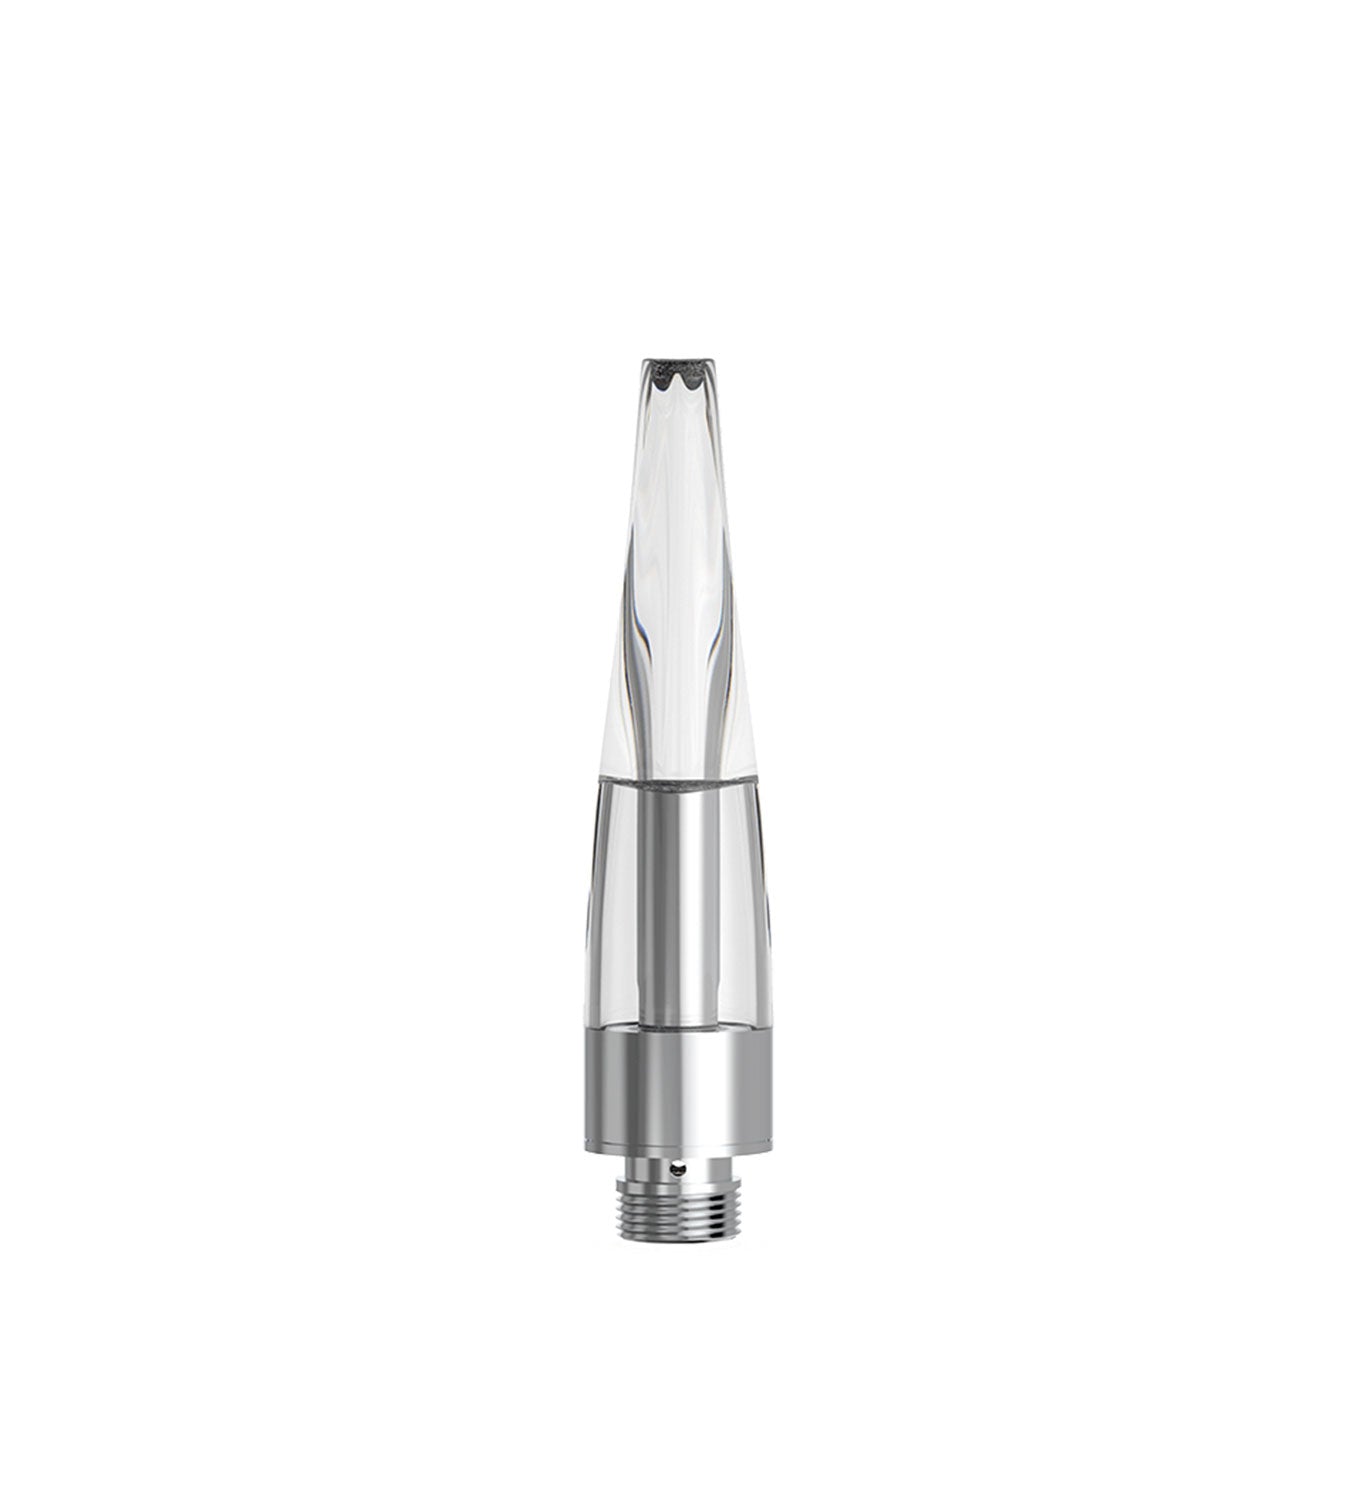 CCELL Zico oil cartridge